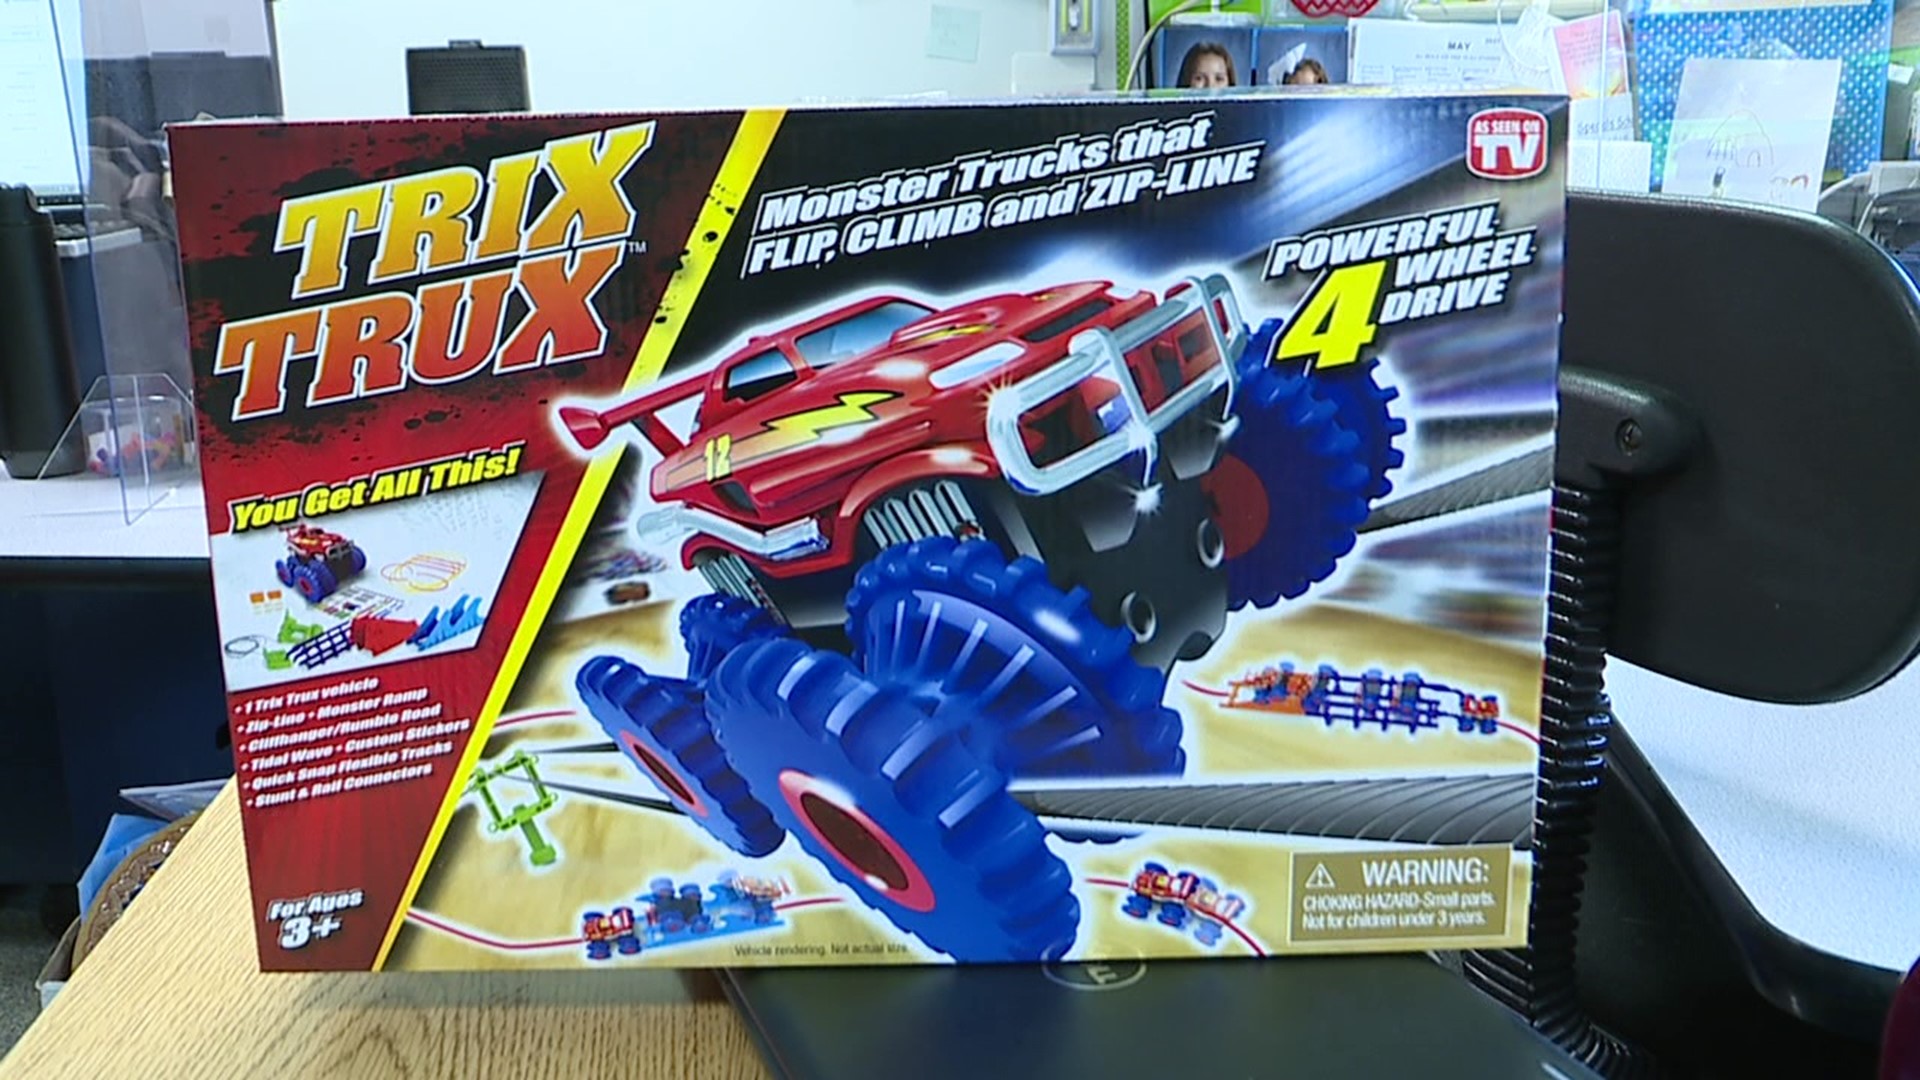 Trix Trux is the ultimate tricked-out, jacked-up monster truck toy.